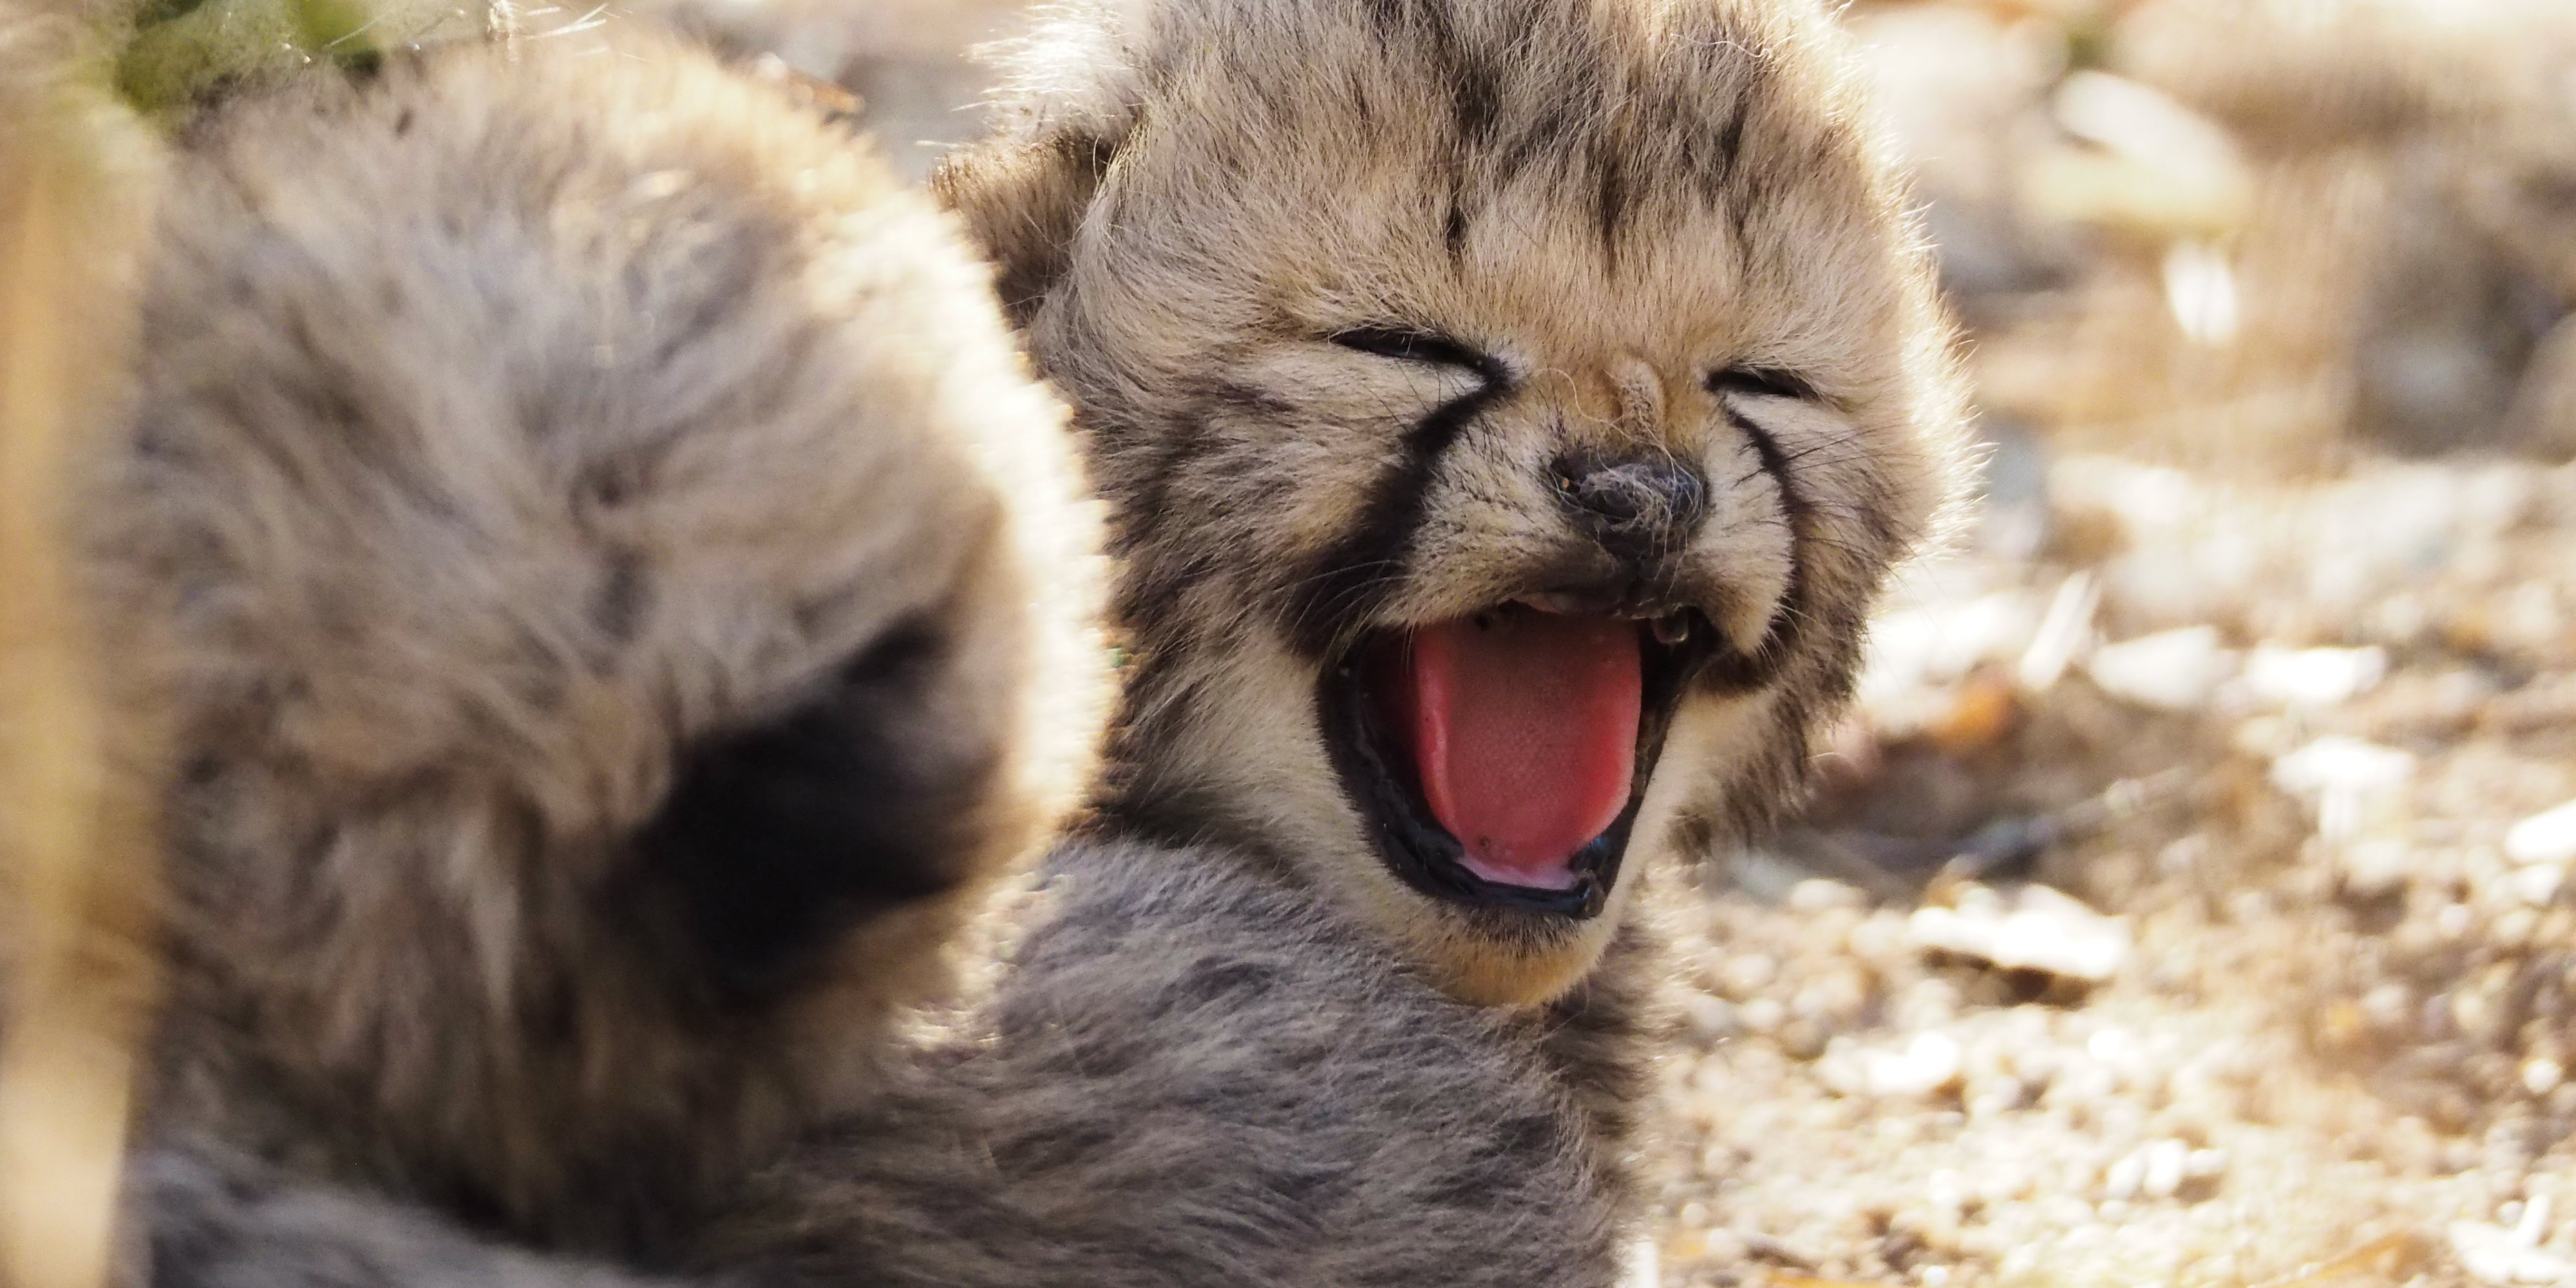 Cheetah cubs yawn. These cubs show the success of the reserve's cheetah conservation efforts.